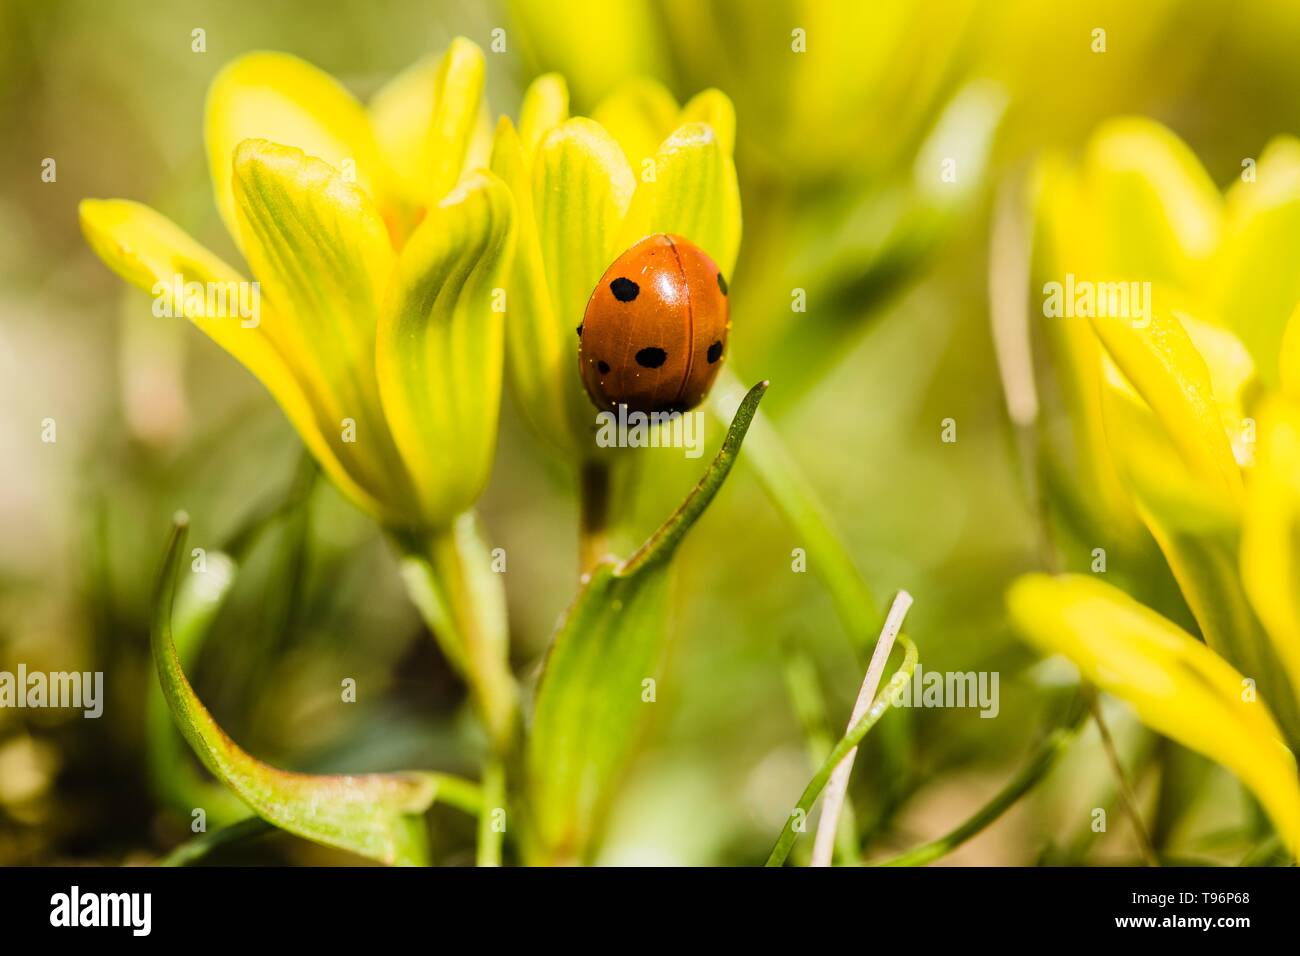 Fresh bright yellow and green lily buds also called Star-of-Bethlehem flower with red ladybird climbing down, blurry background, sunny spring day. Stock Photo